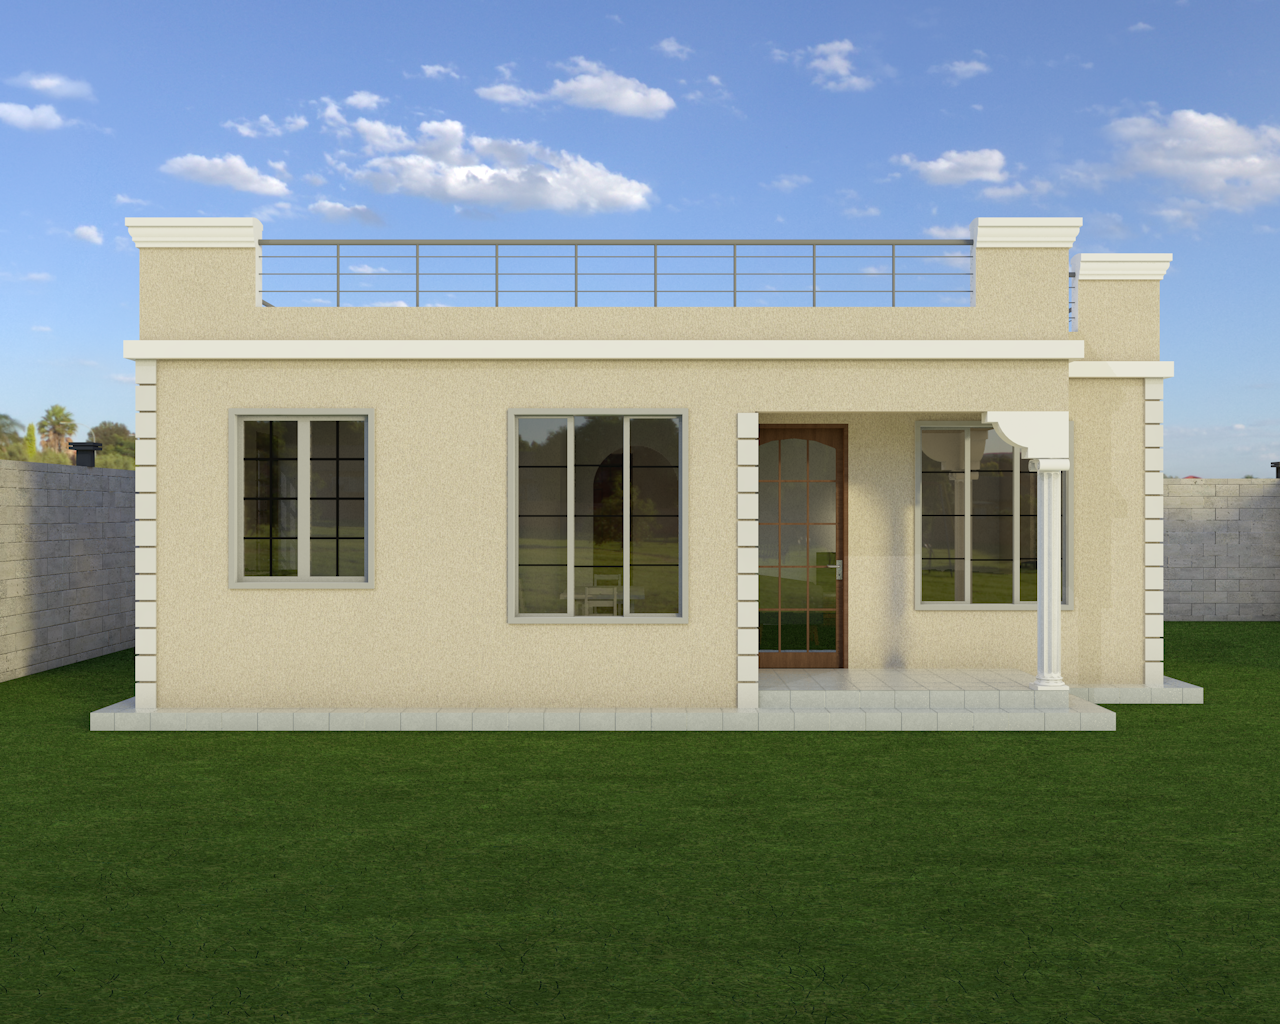 A Three Bedroom Bungalow House Plan